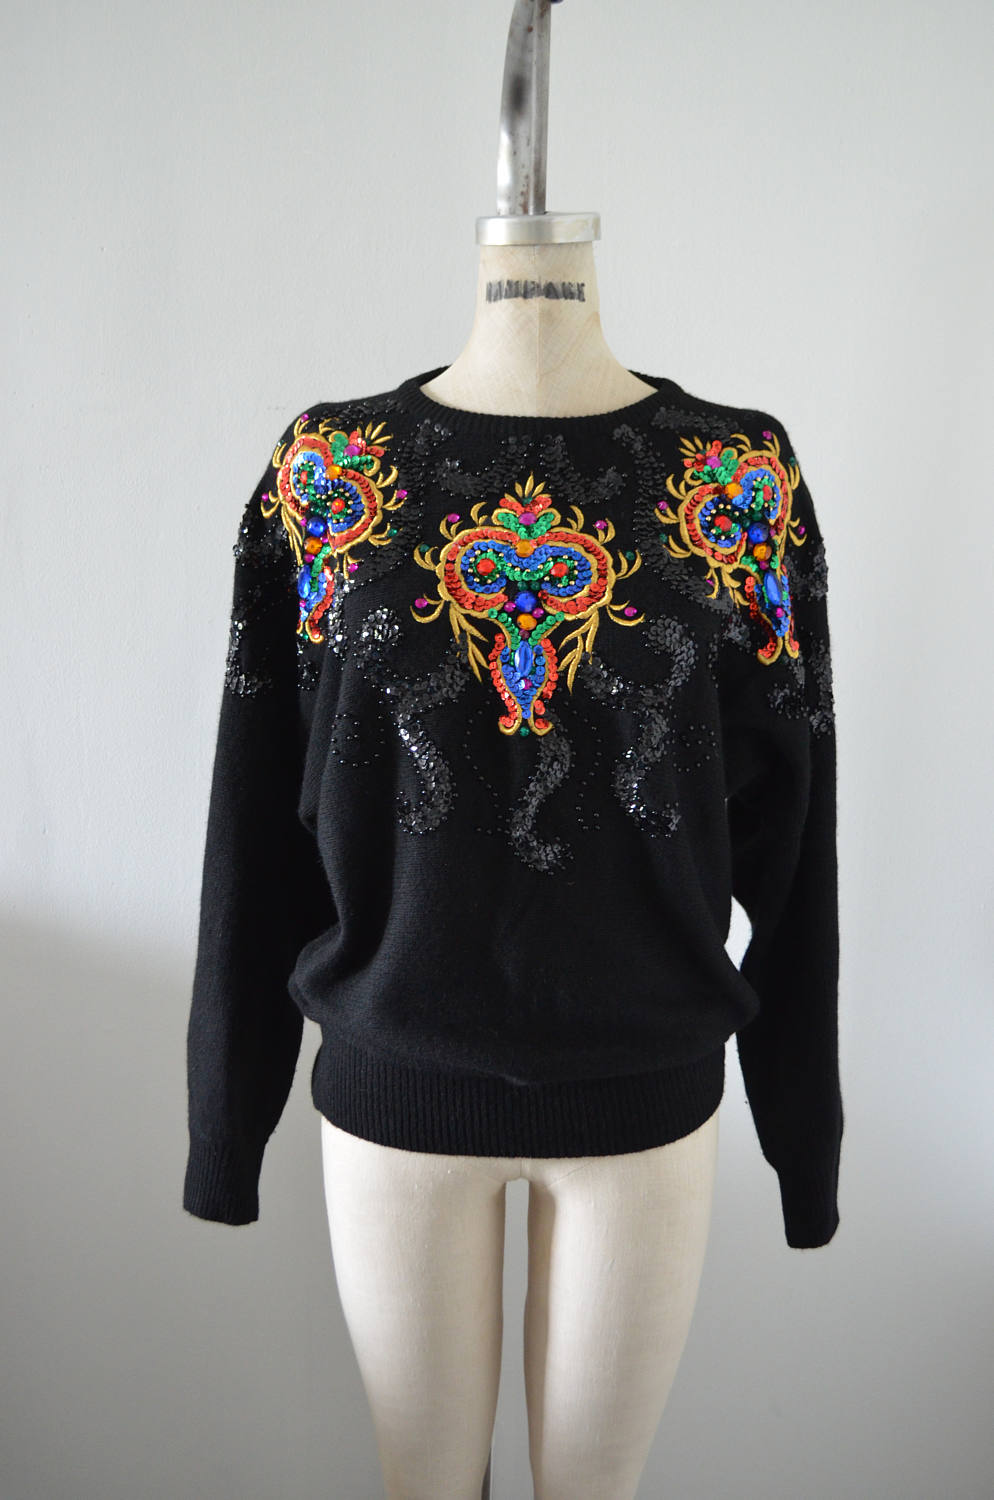 Jewelry Sequined Sweatshirt Blouse Sparkling Embroidery Beaded Black/Colorful Sweatershirt